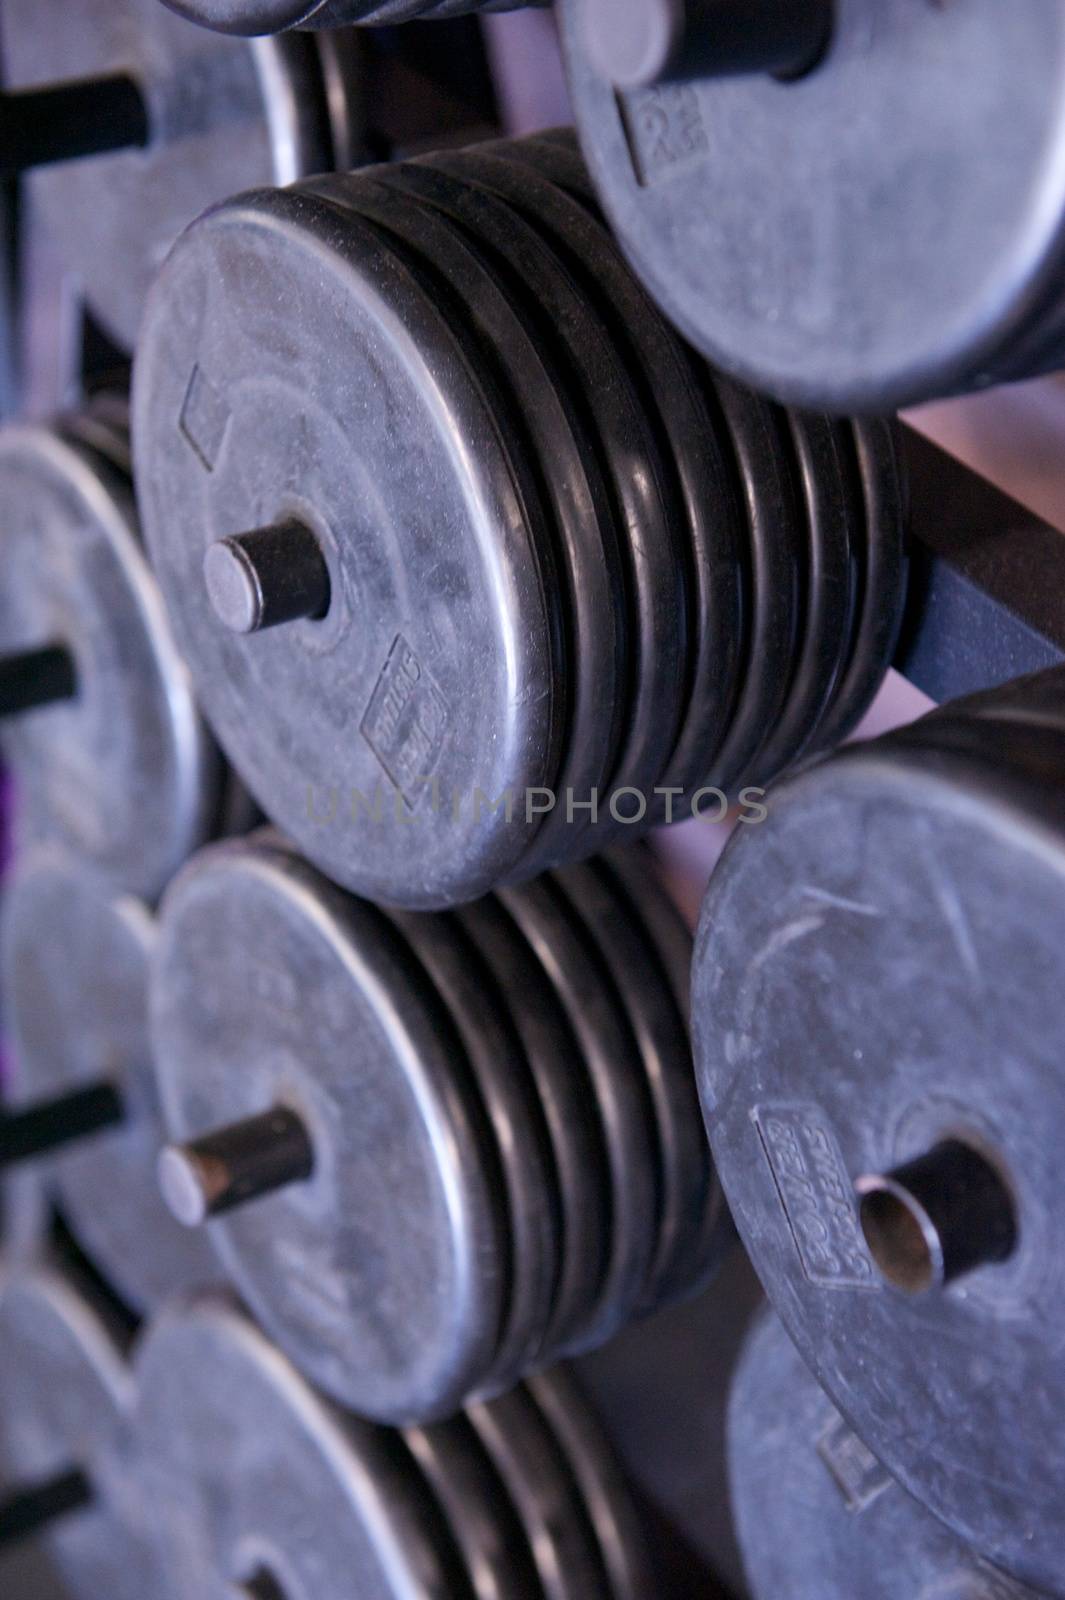 Rack of Free Weight Plates at a Professional Gym by pixelsnap